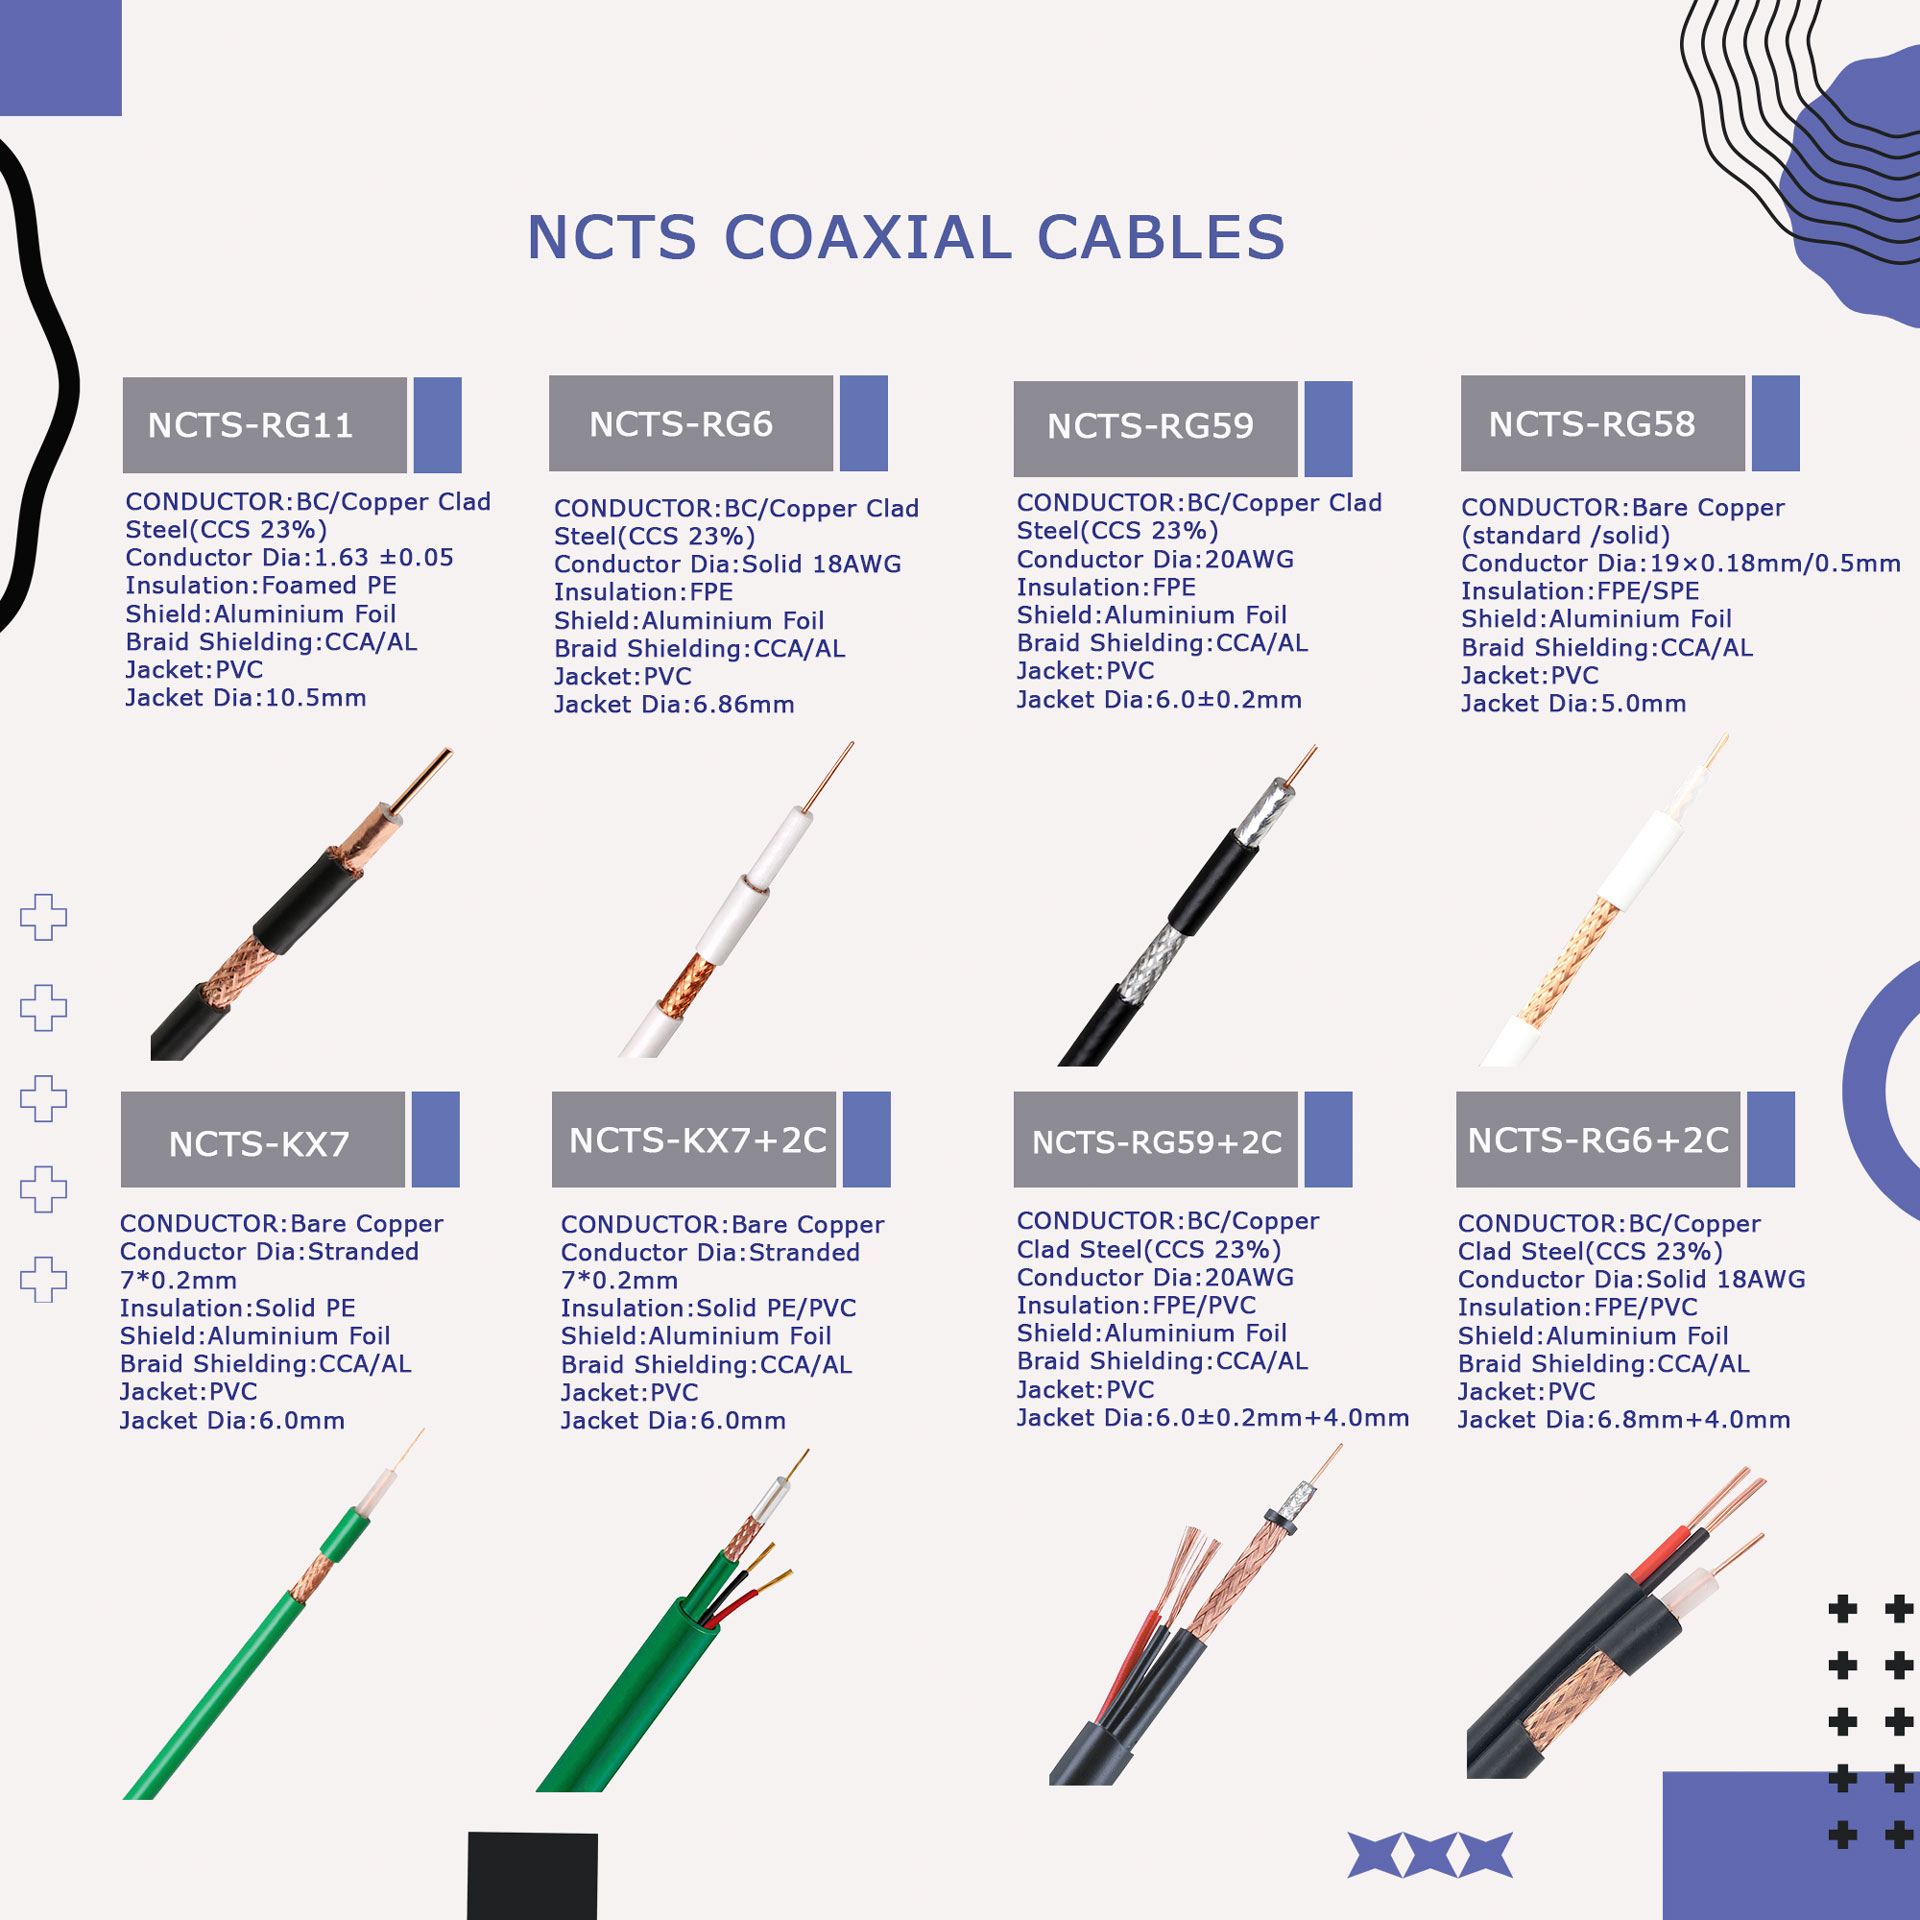 NCTS coaxial cables